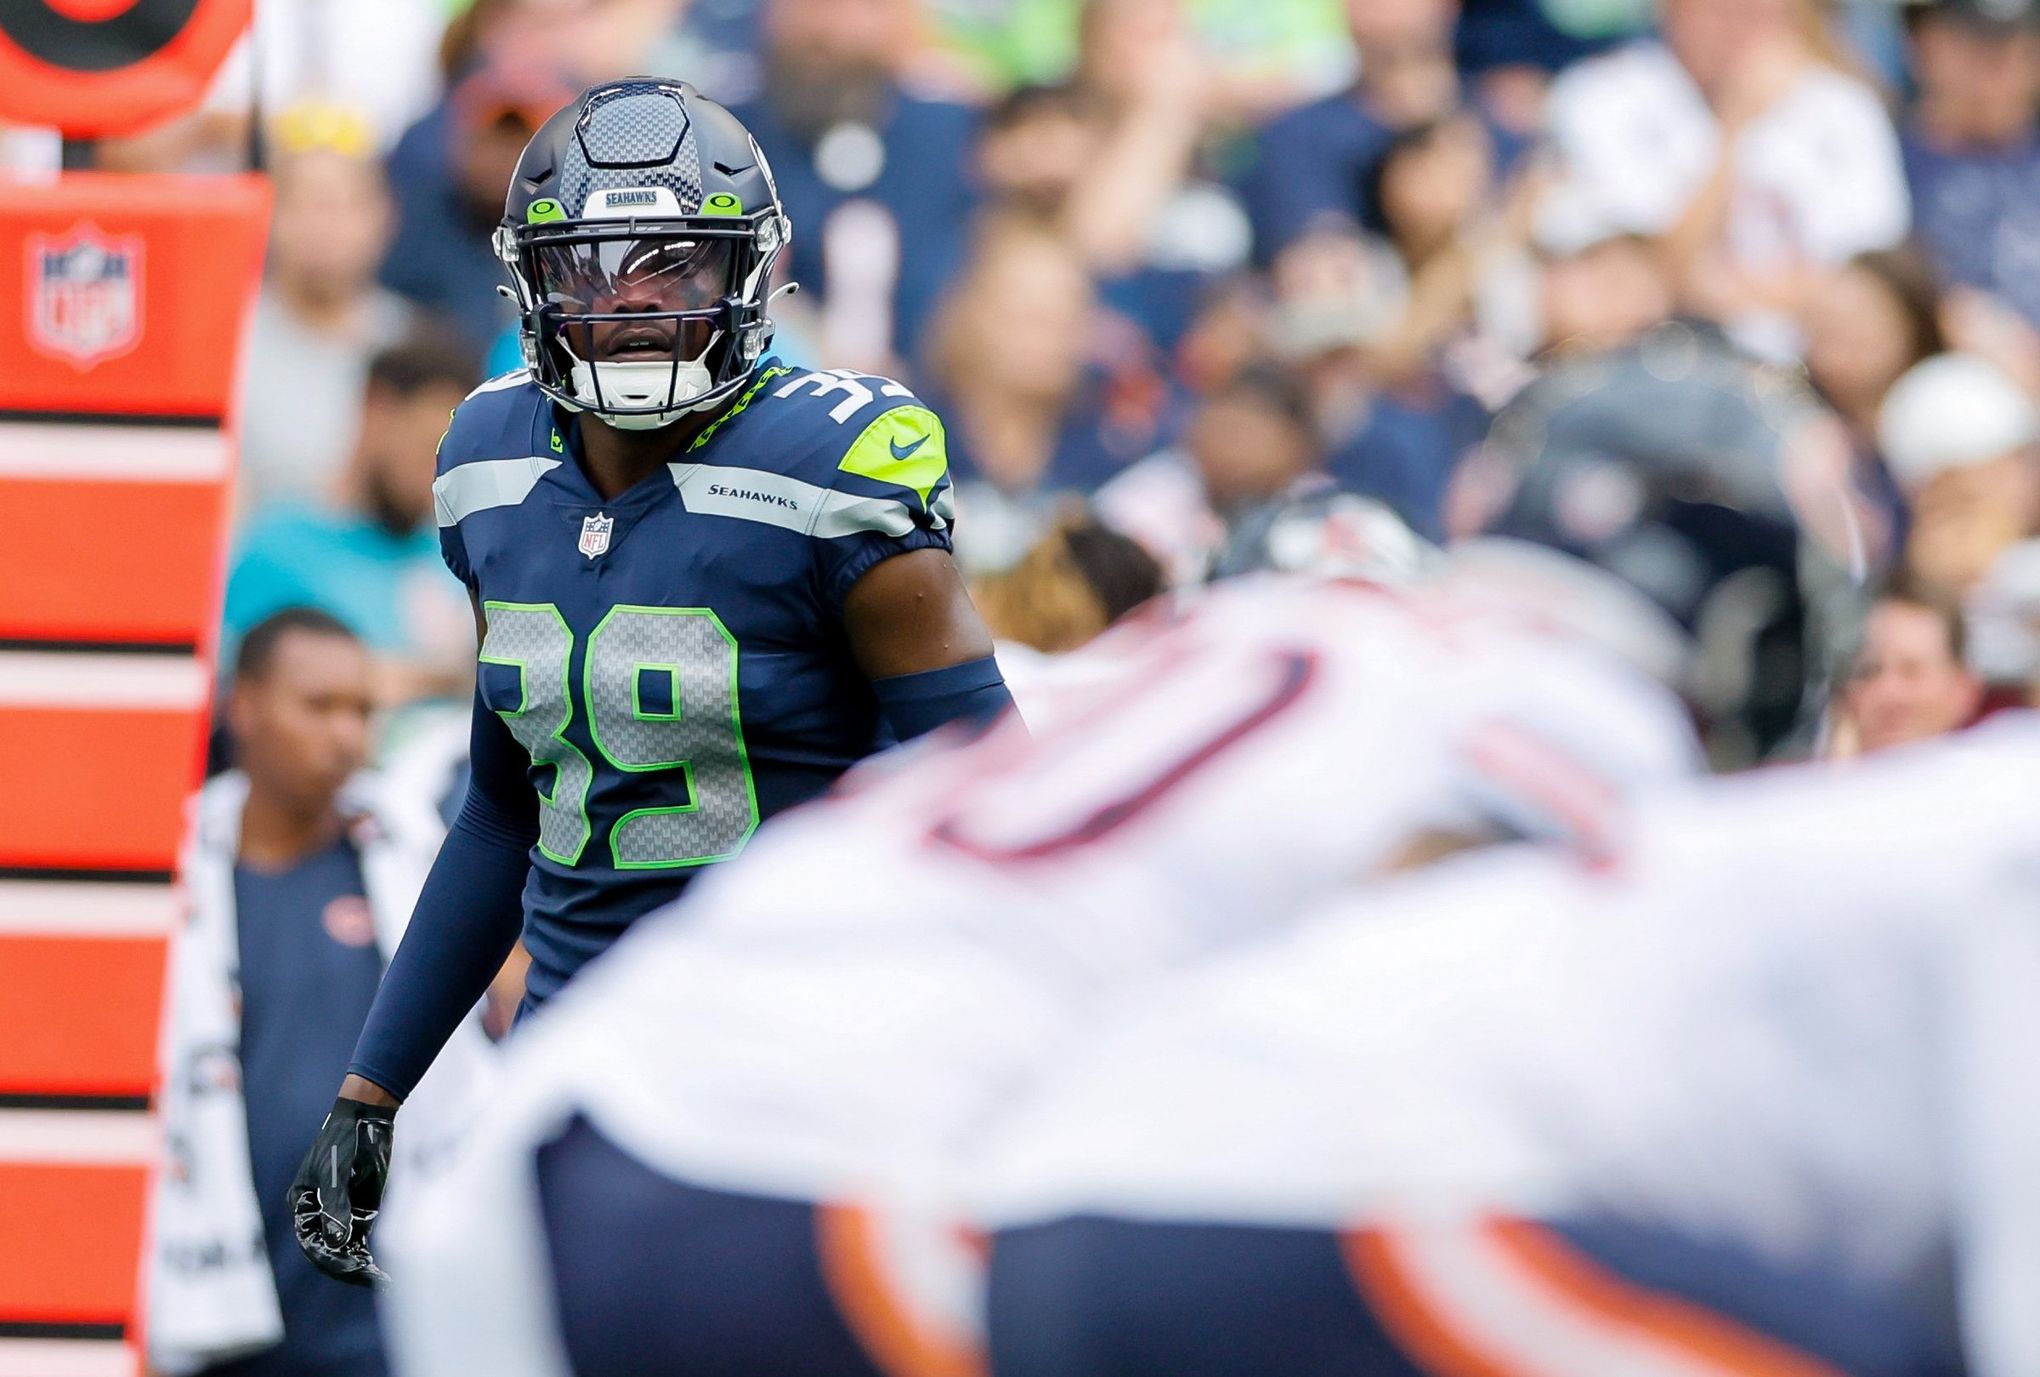 DK Metcalf and Tariq Woolen injuries add to the growing Seahawks